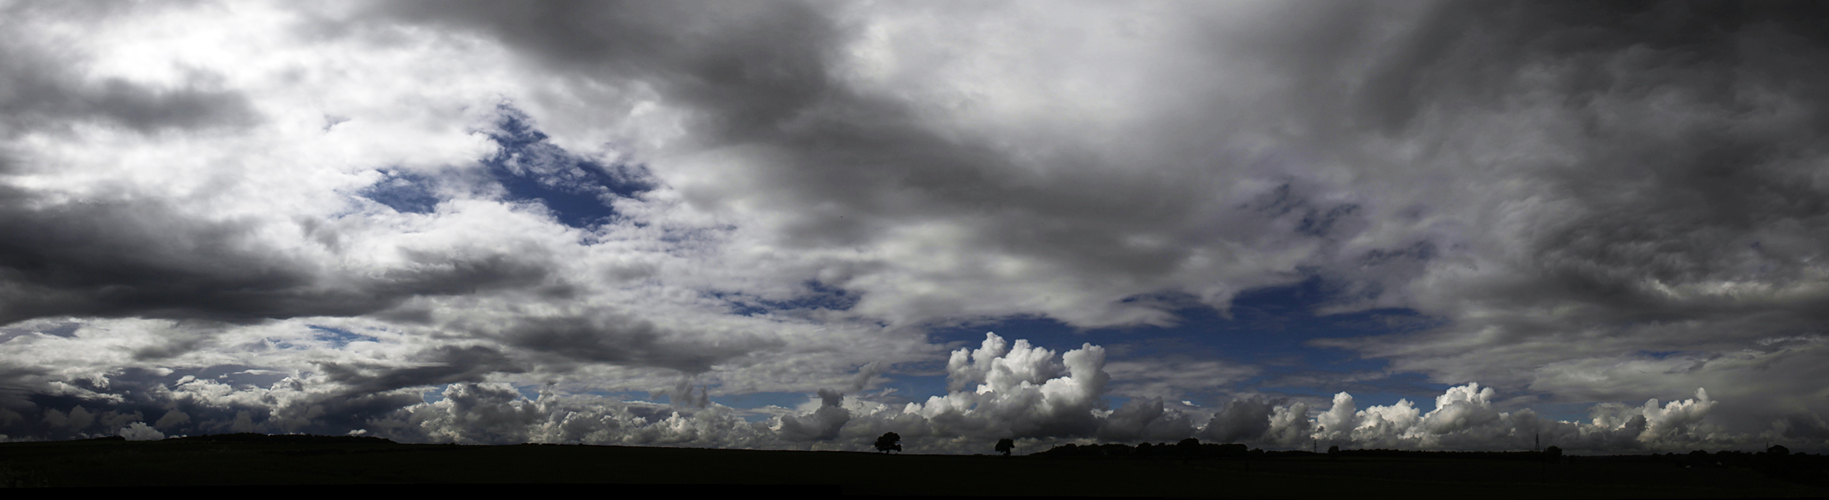 Cloud panoramic, Gloucestershire by Adam Gasson